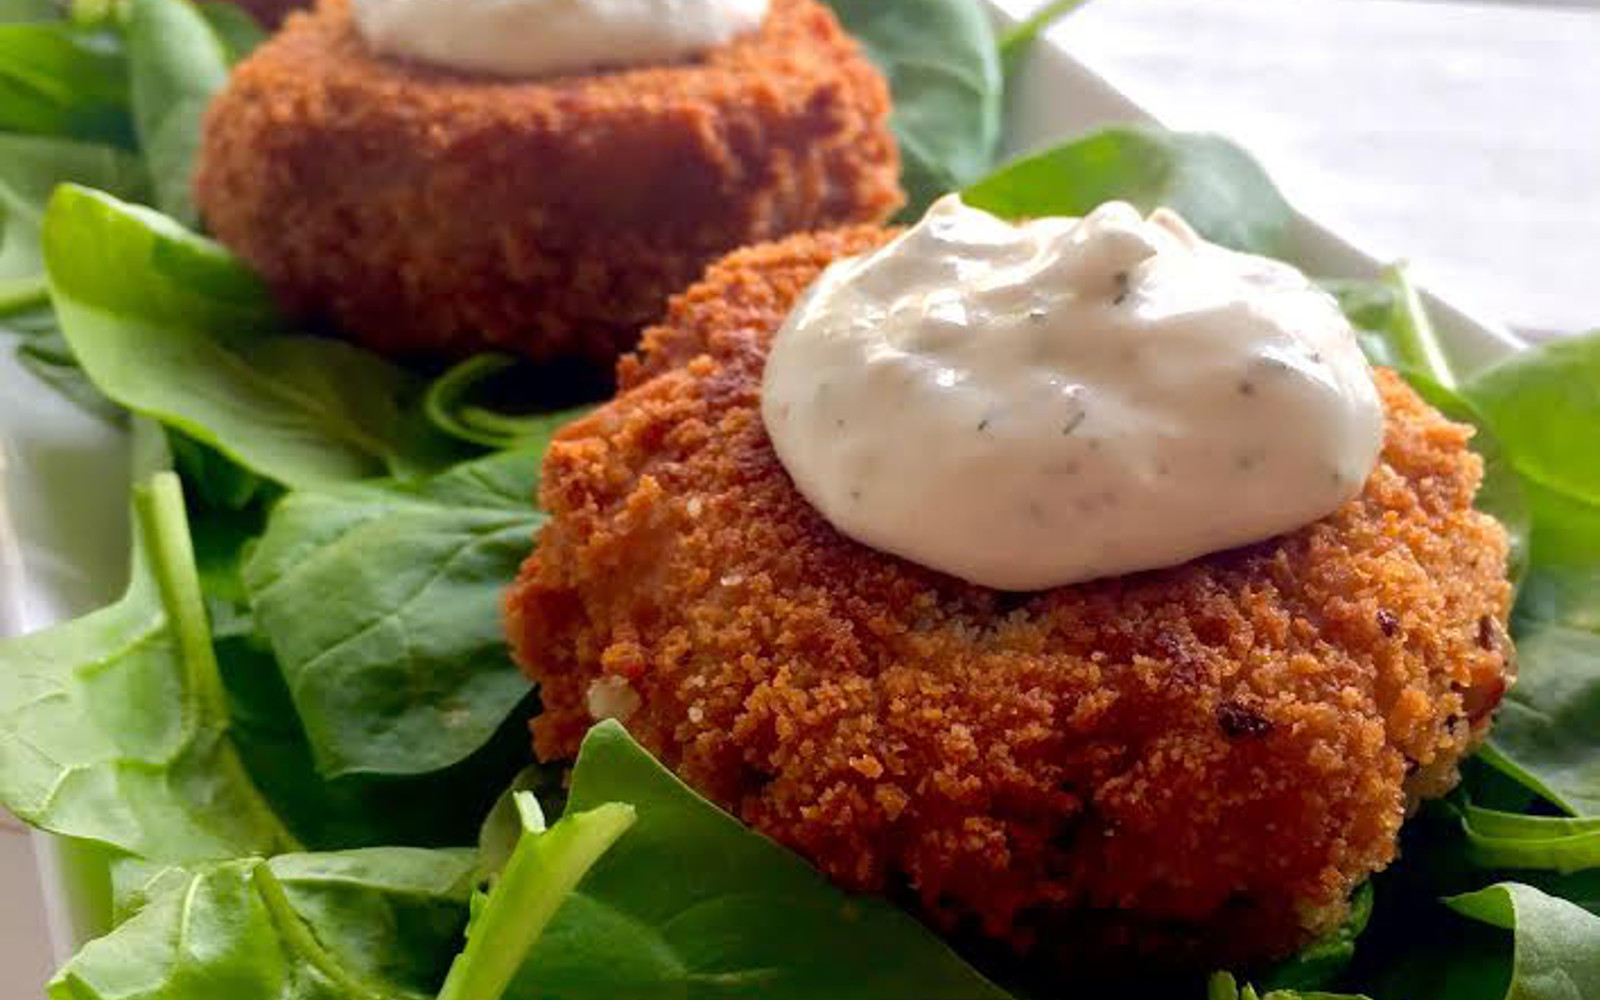 Battered Hearts of Palm Crab Cakes With Tartar Sauce